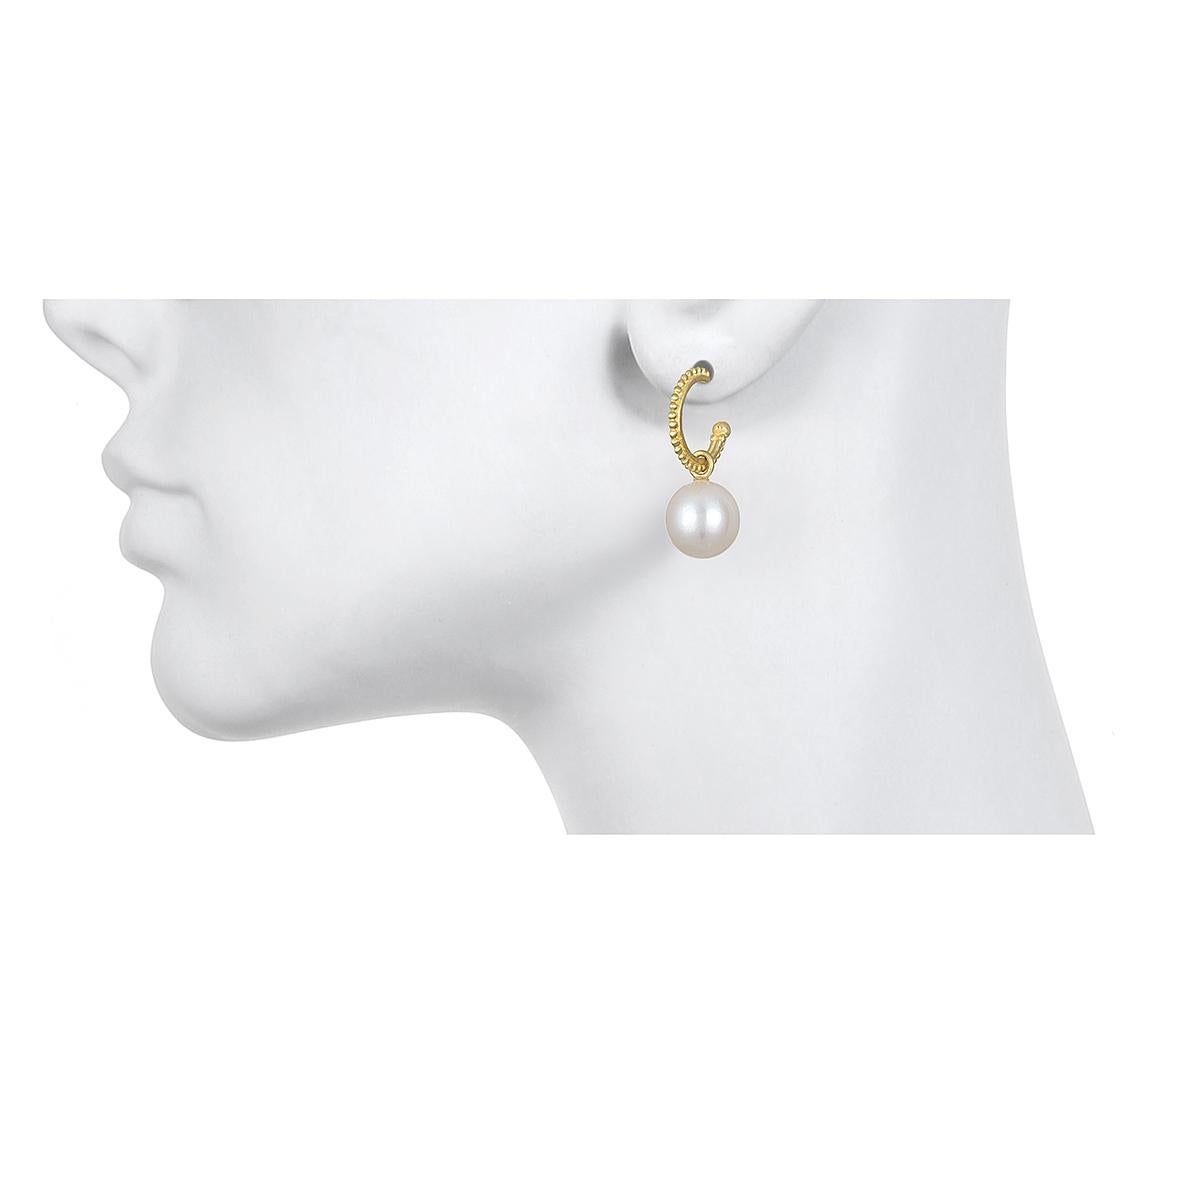 Uncut Faye Kim 18 Karat Gold Granulation Hoops with Freshwater Pearl Drops For Sale